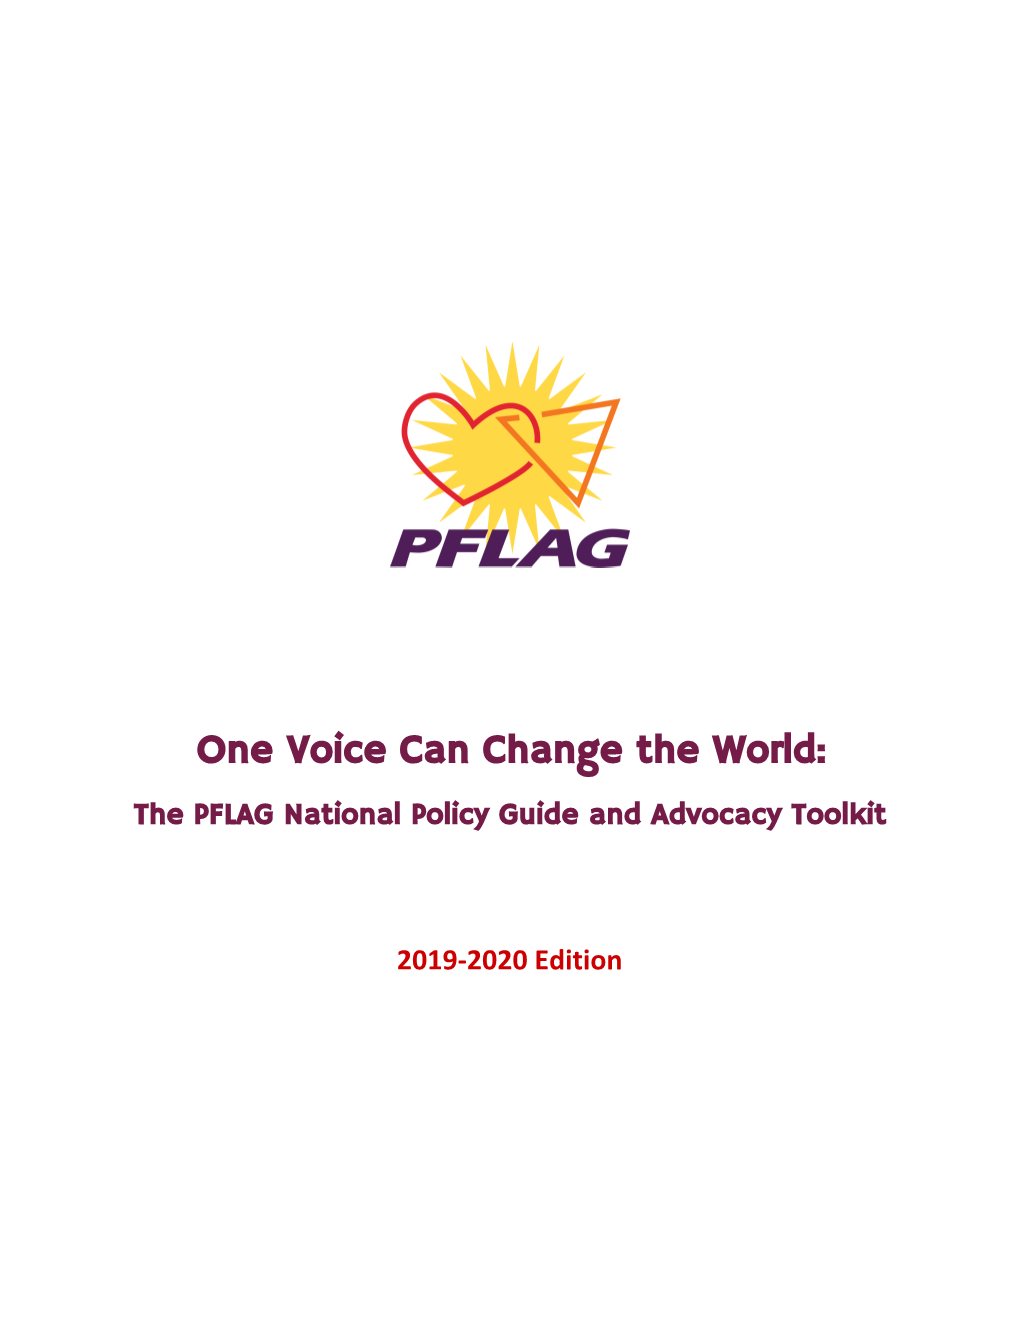 One Voice Can Change the World: the PFLAG National Policy Guide and Advocacy Toolkit